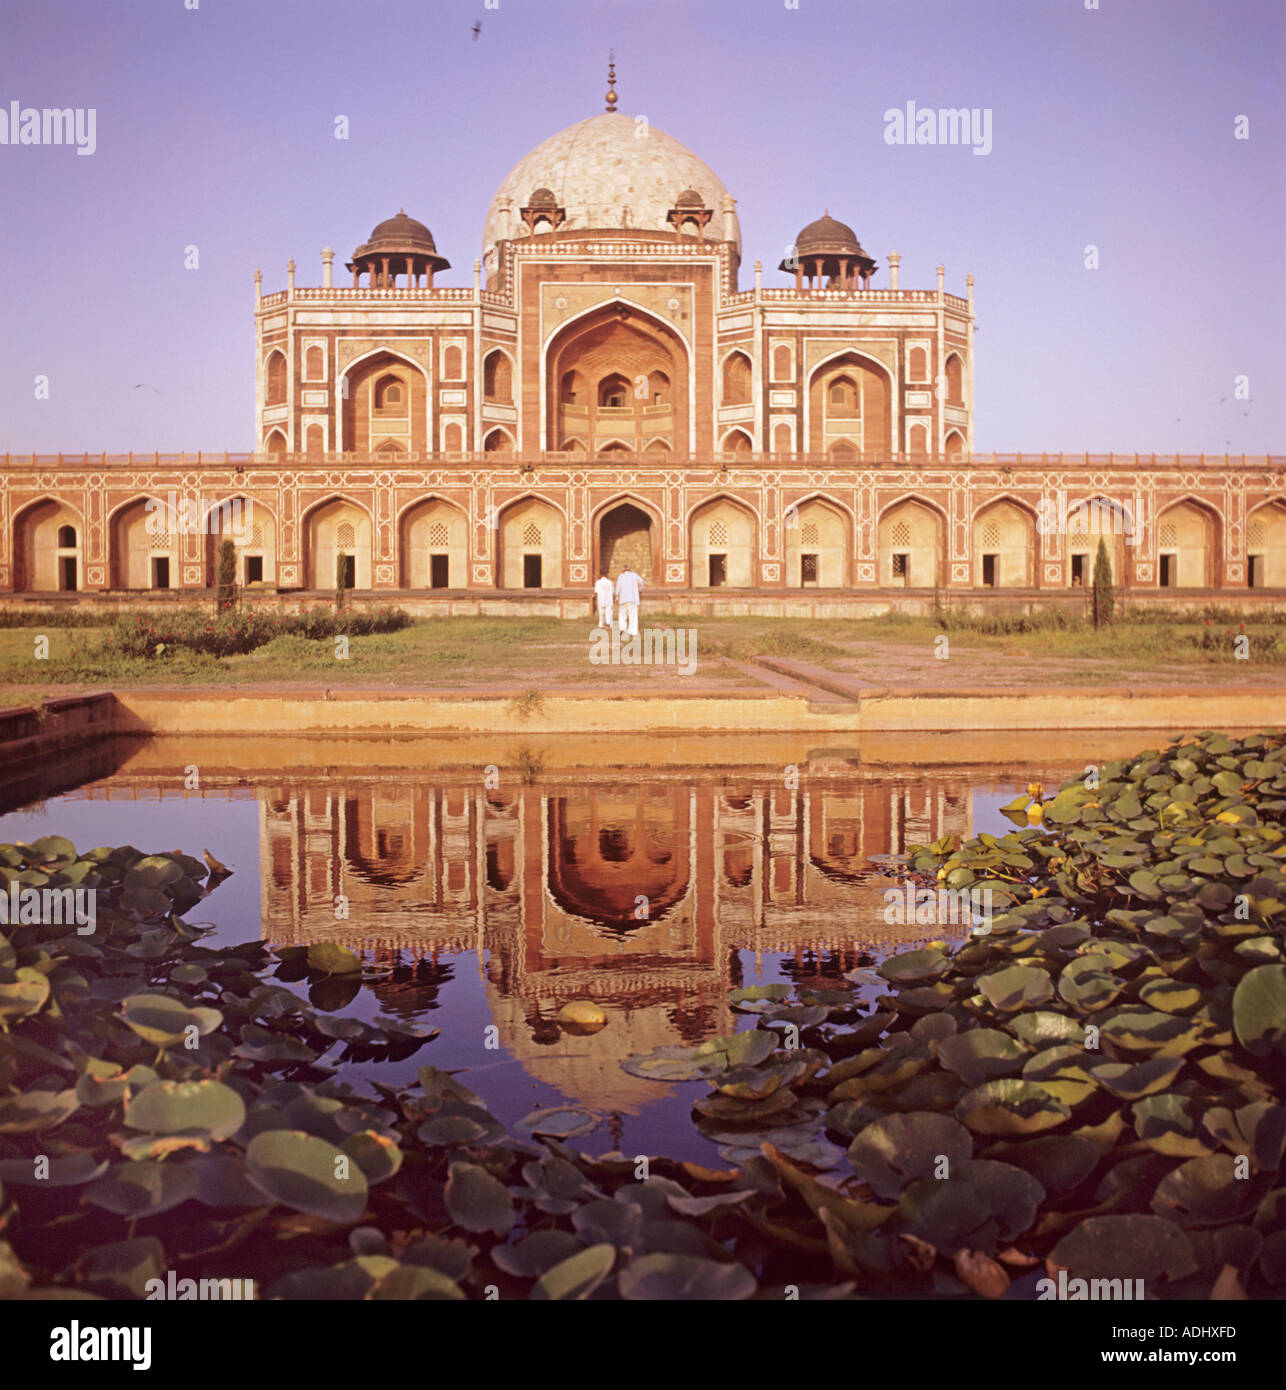 Humayuns Tomb is a tourist attraction of Delhi Built by Haji Begum to the Emperor Humayun in the 16th century in combinations of Stock Photo